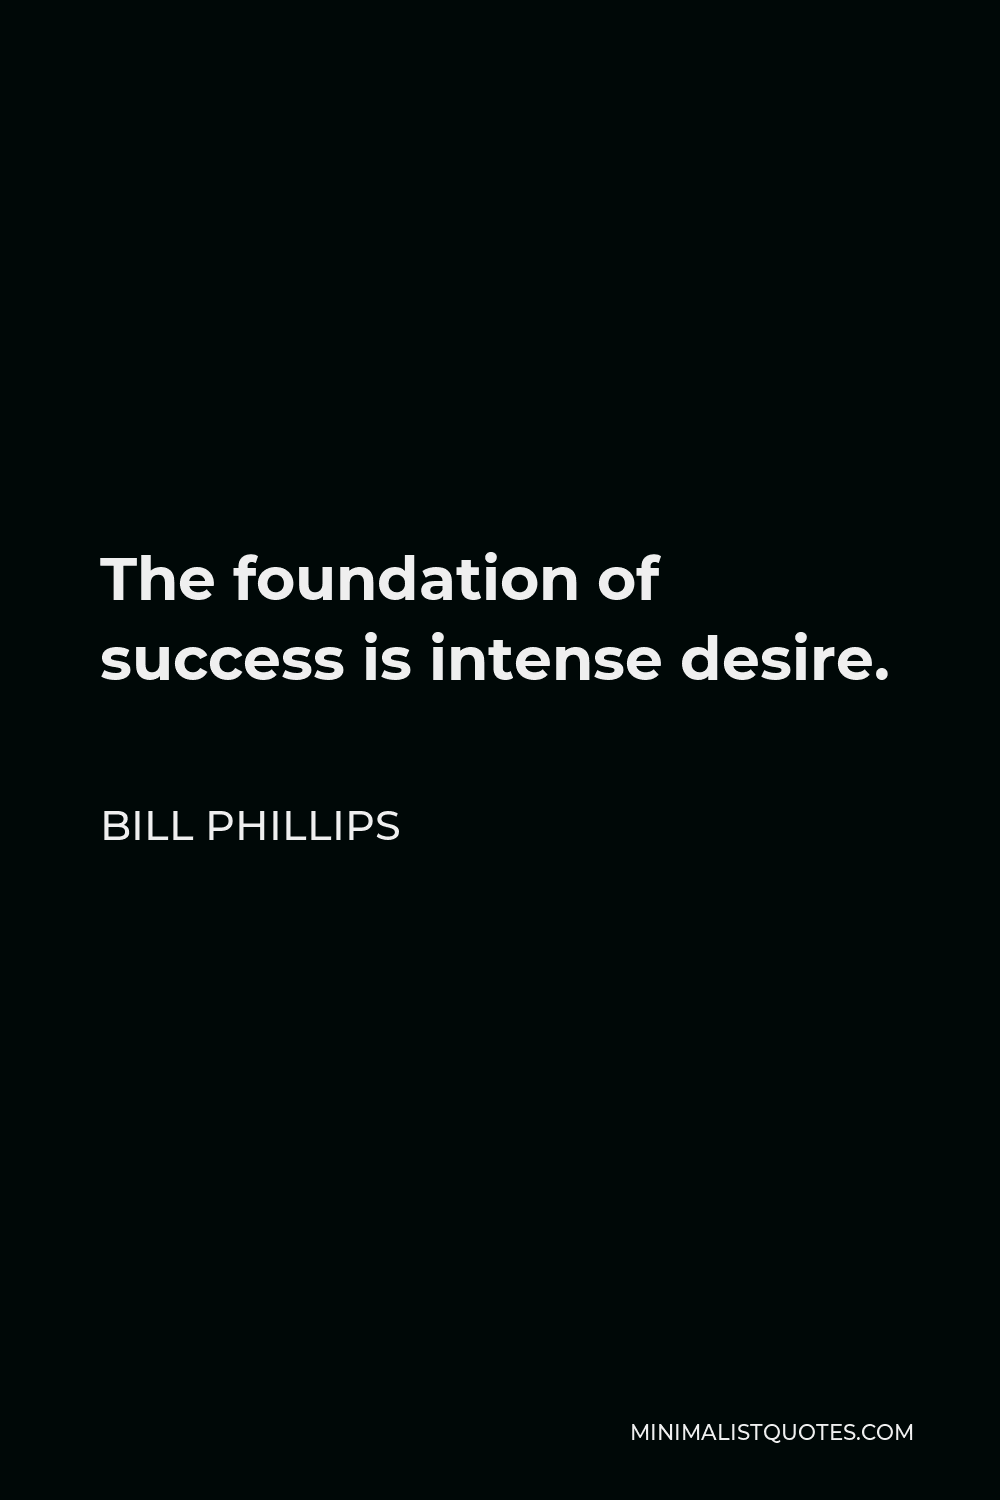 Bill Phillips Quote - The foundation of success is intense desire.